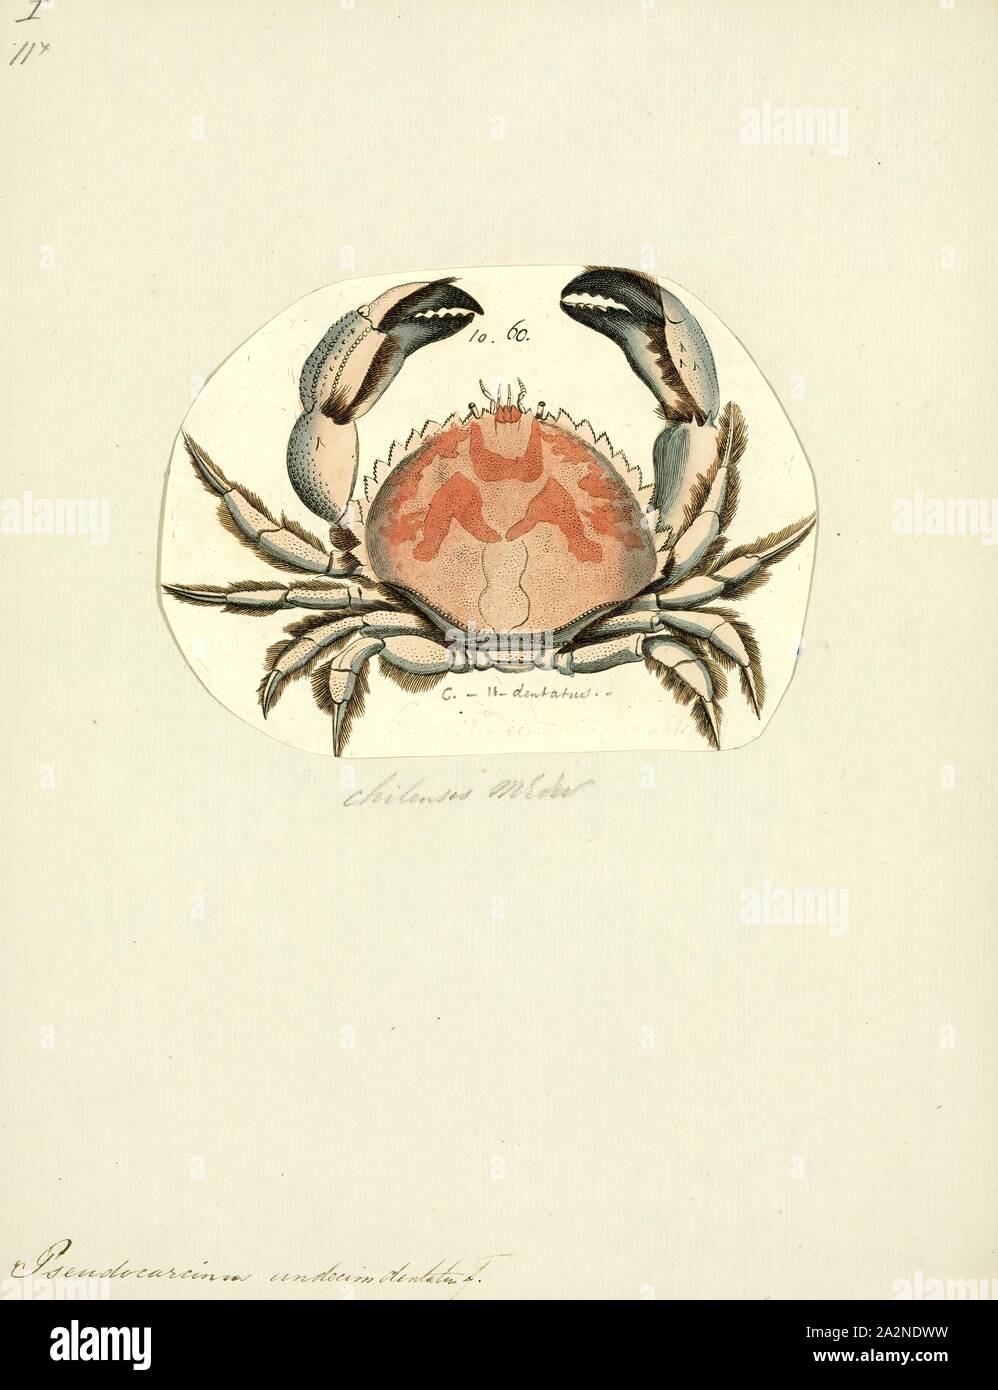 Pseudocarcinus undecimdentatus, Print, The Tasmanian giant crab, Pseudocarcinus gigas (sometimes known as the giant deepwater crab, giant southern crab or queen crab) is a very large species of crab that resides on rocky and muddy bottoms in the oceans off Southern Australia. It is the only species in the genus Pseudocarcinus Stock Photo